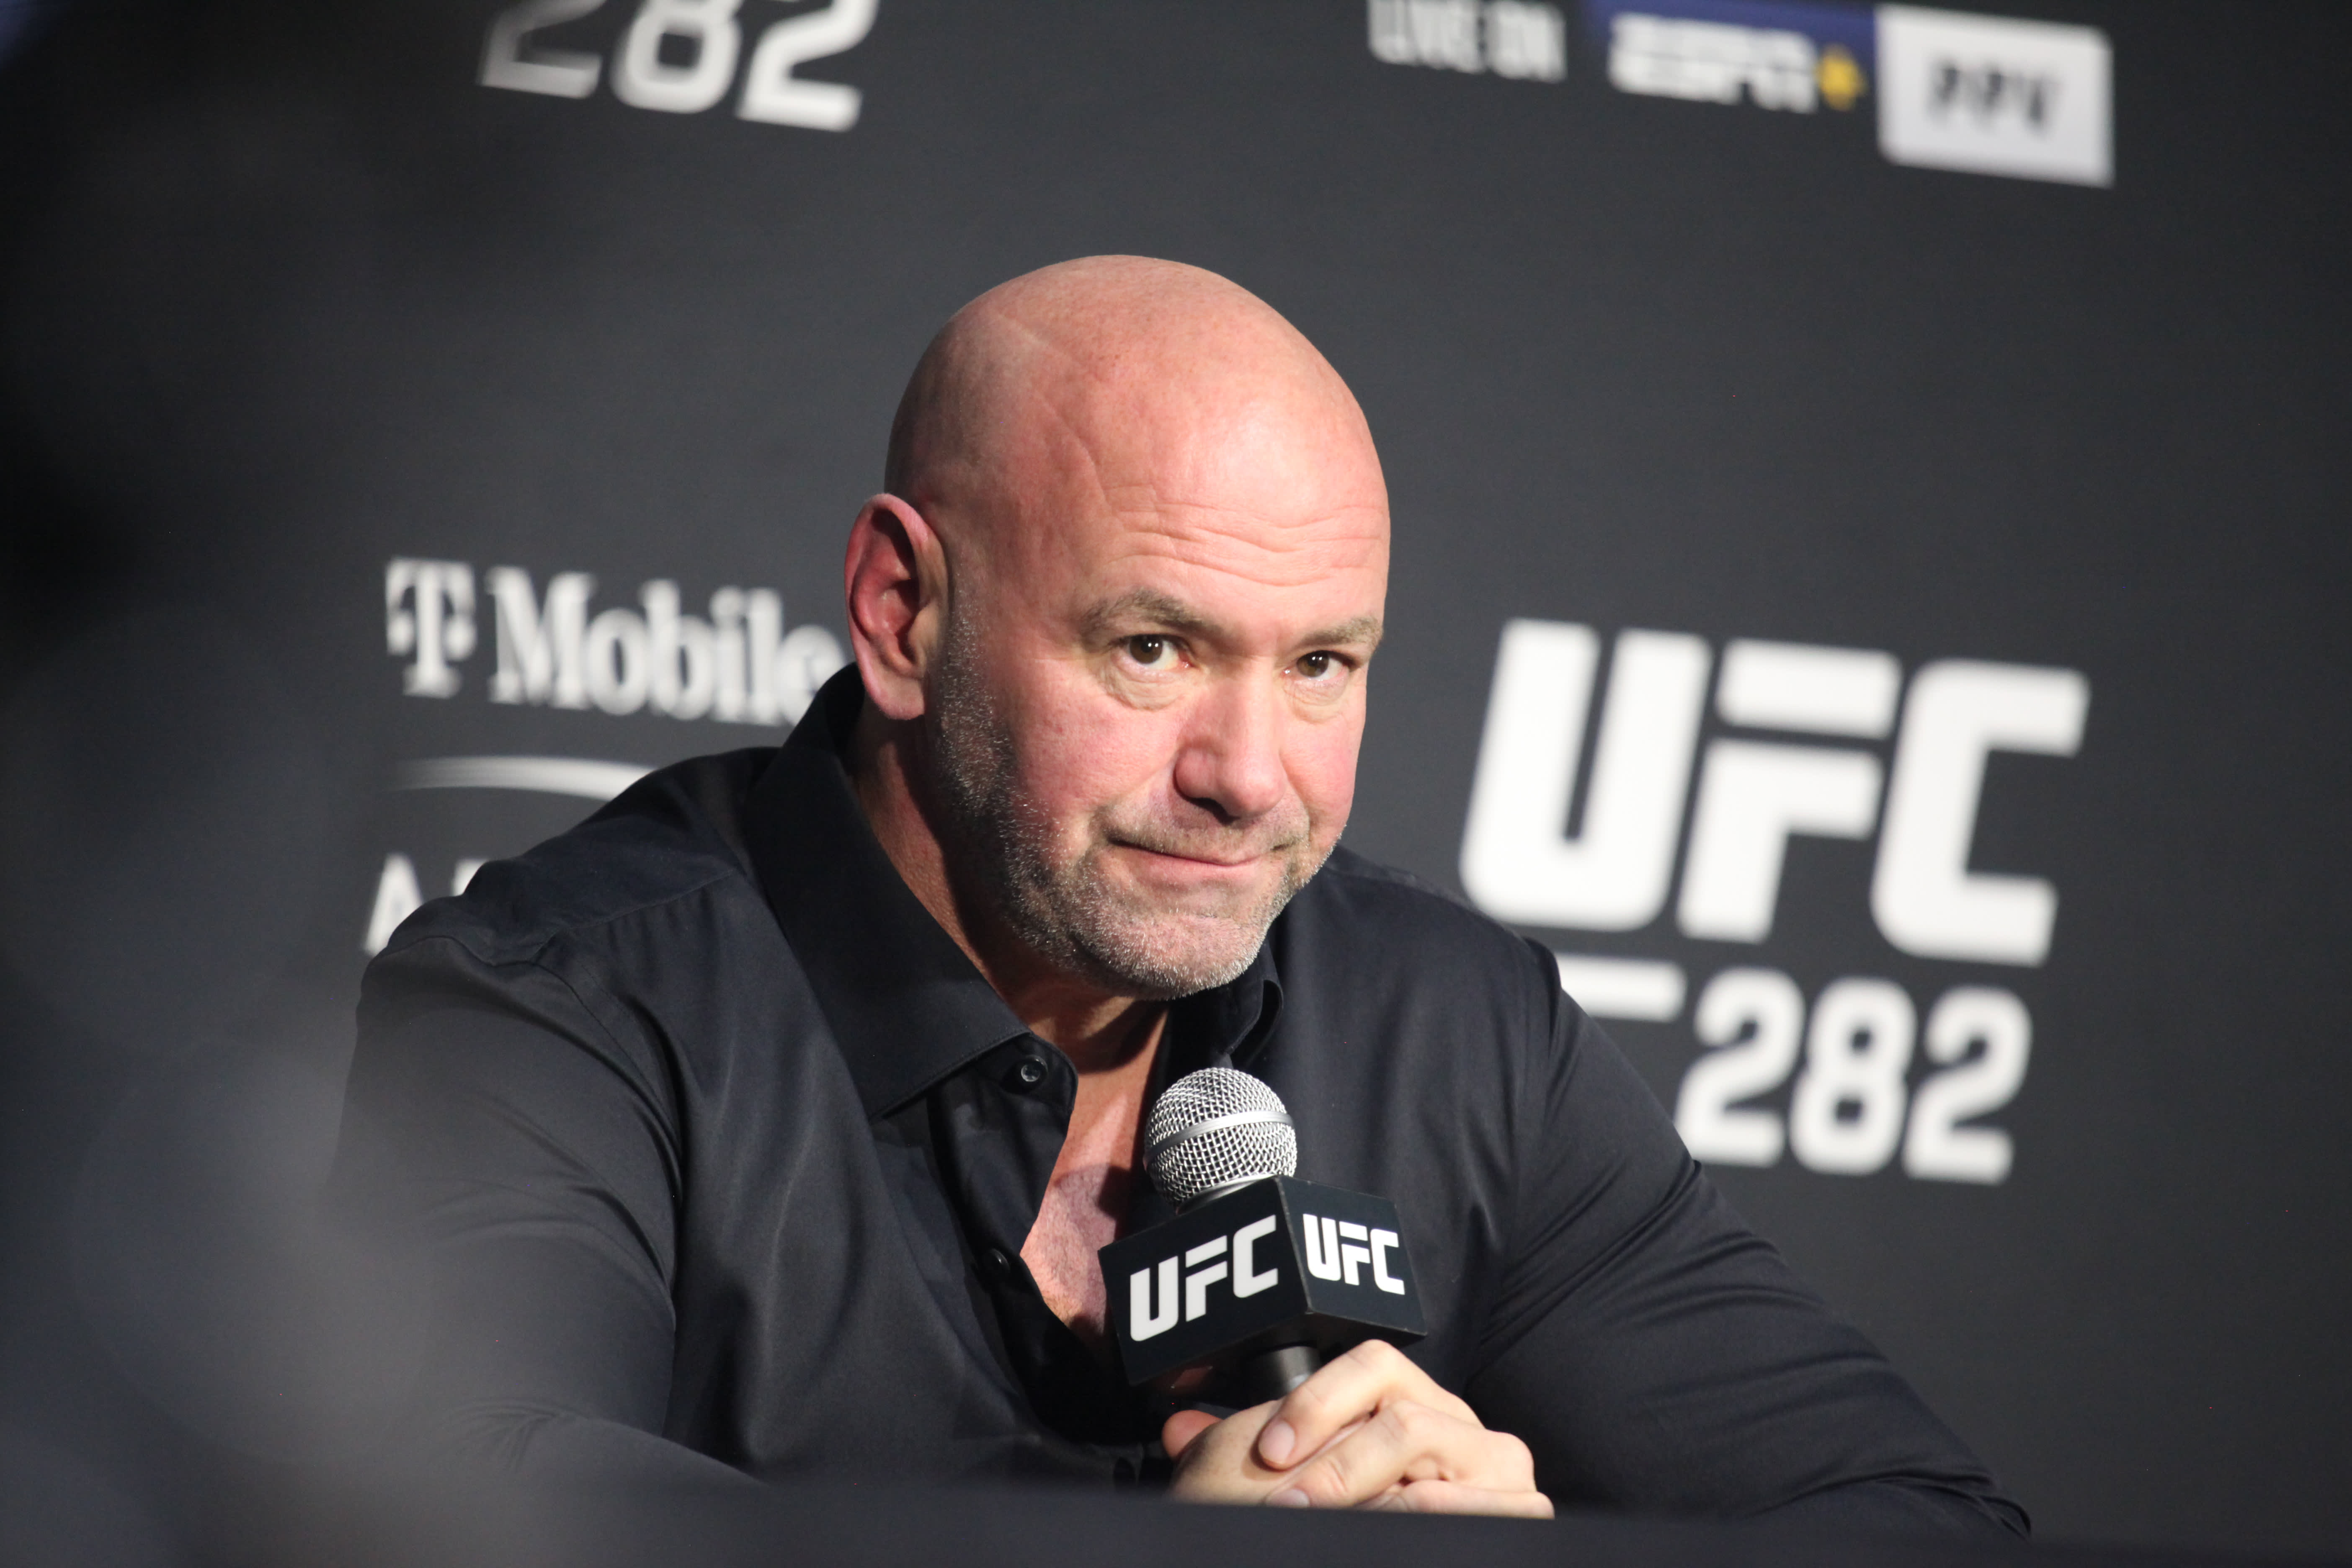 Endeavor falls after UFC boss Dana White hits wife